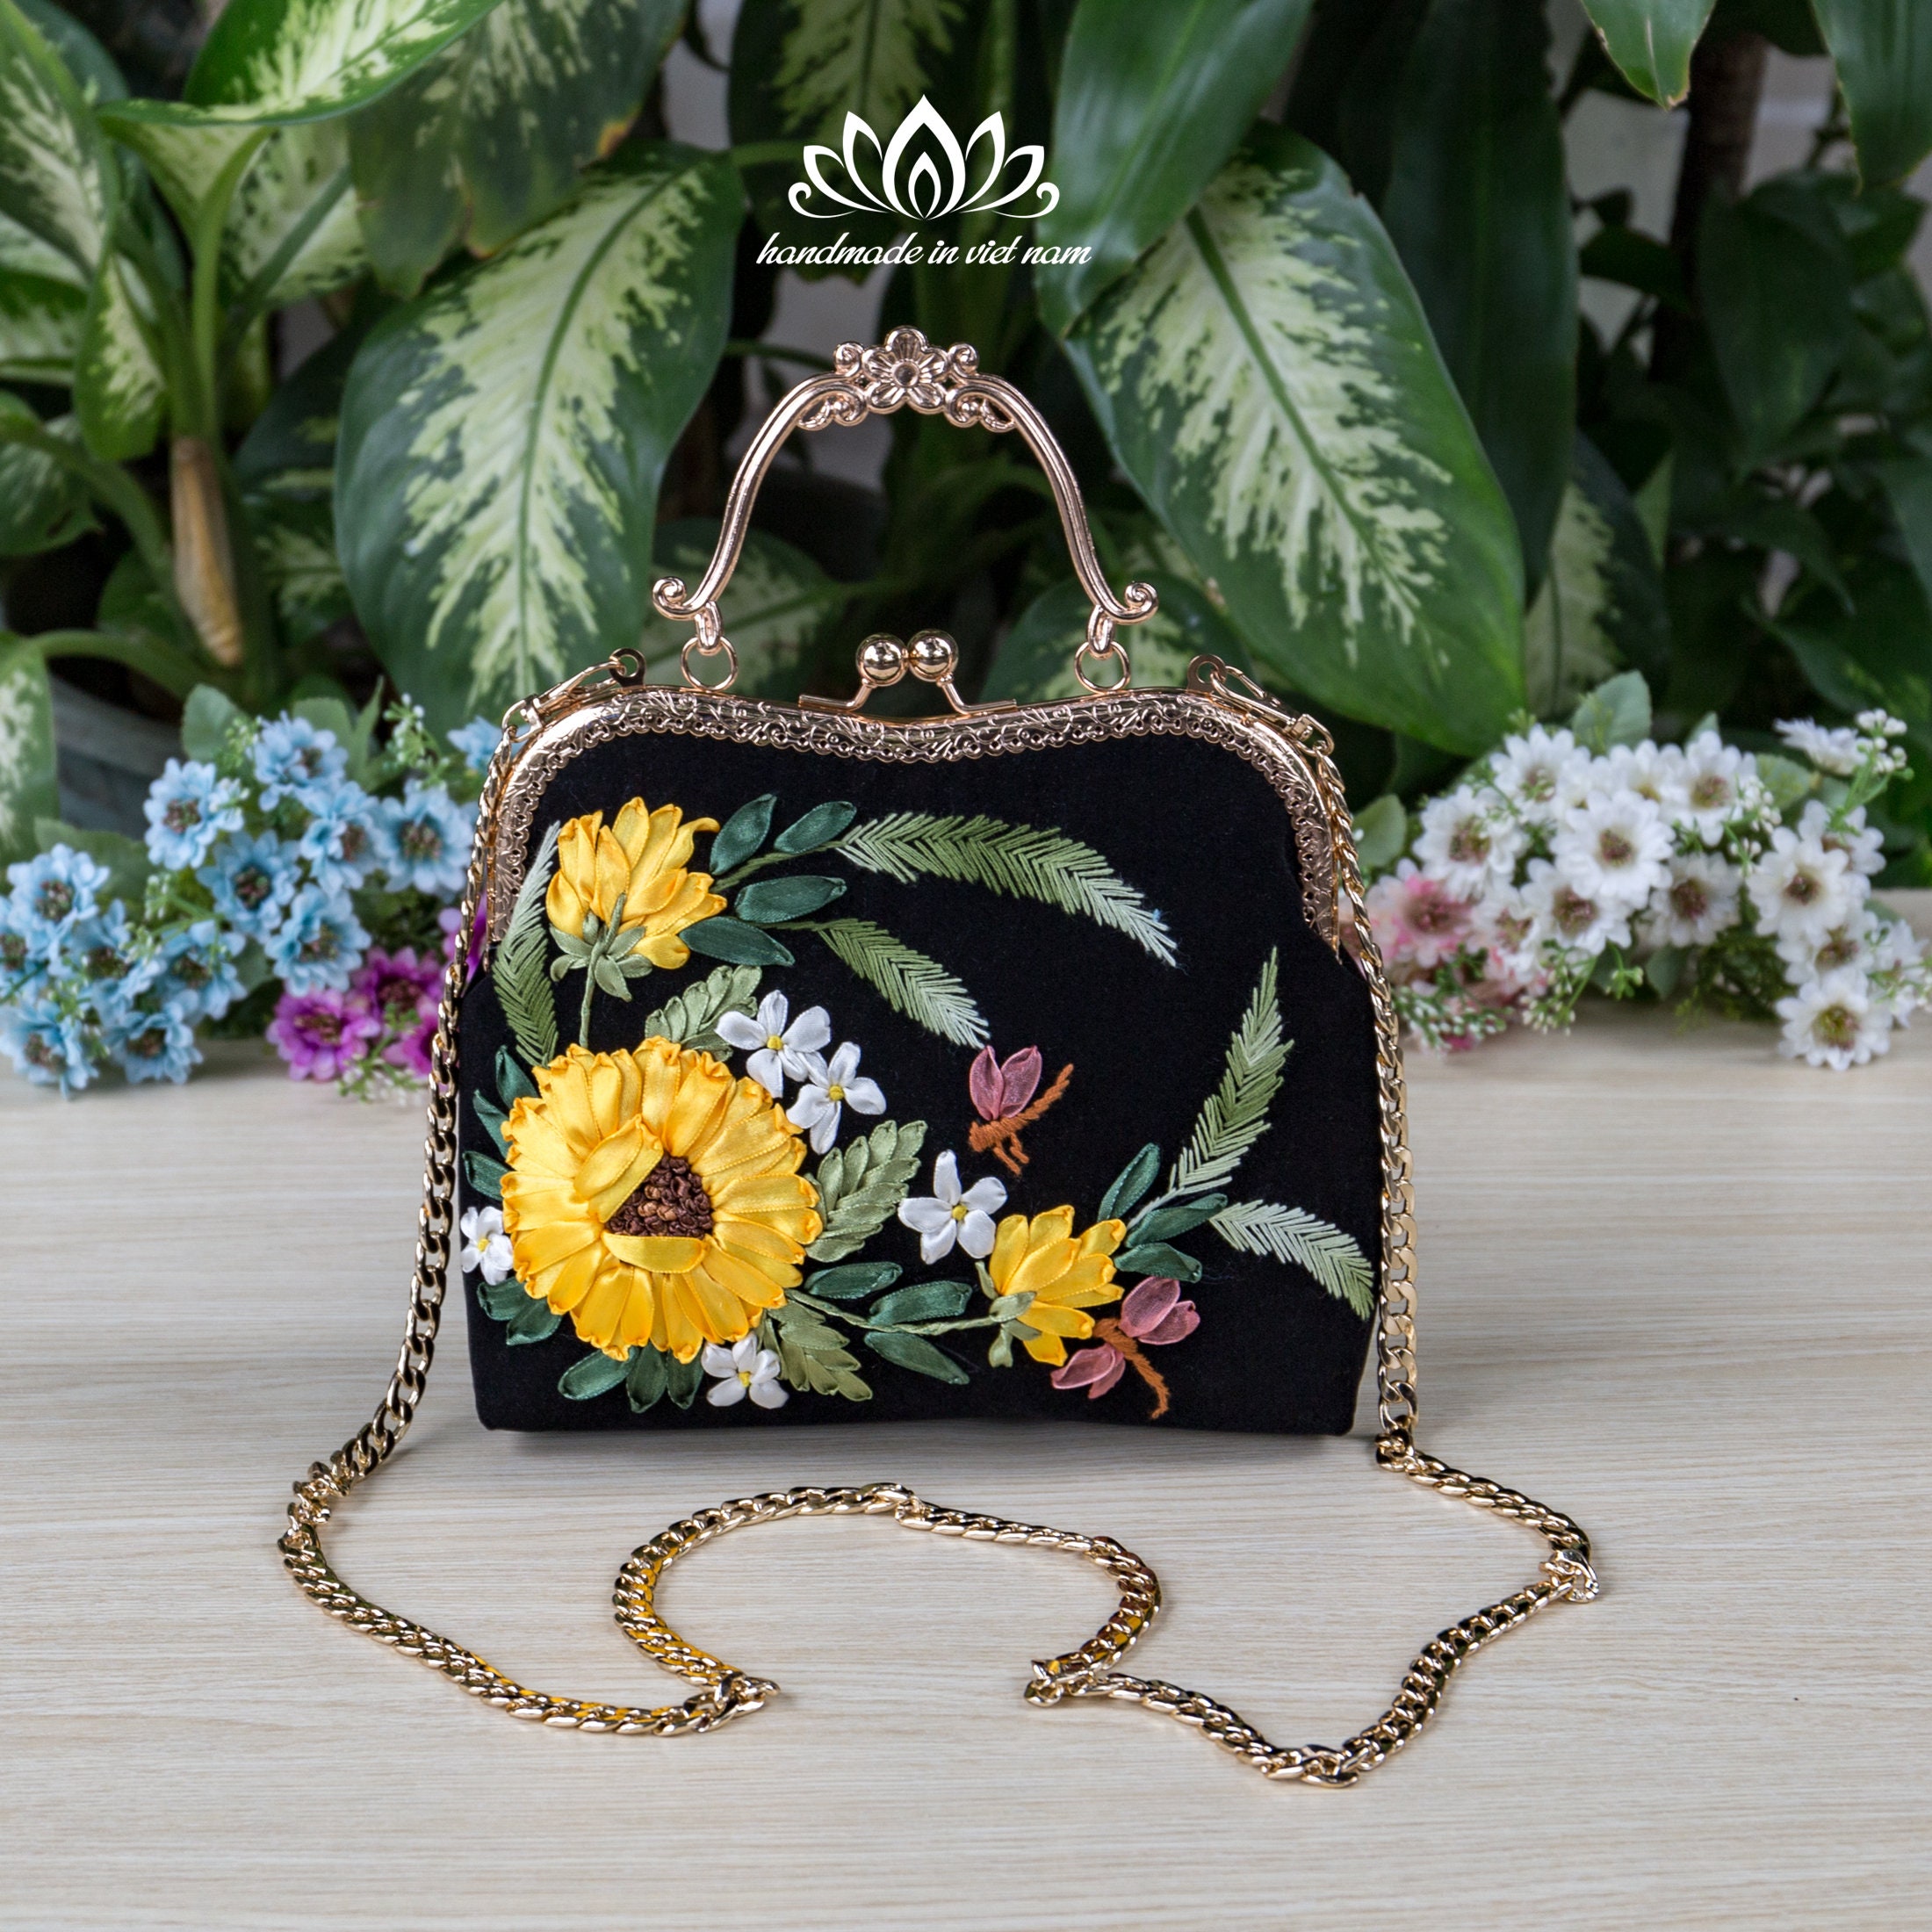 Embroidered Handbag and Wallet Set, Handbags with Straps, Lily of The Valley Embroidery